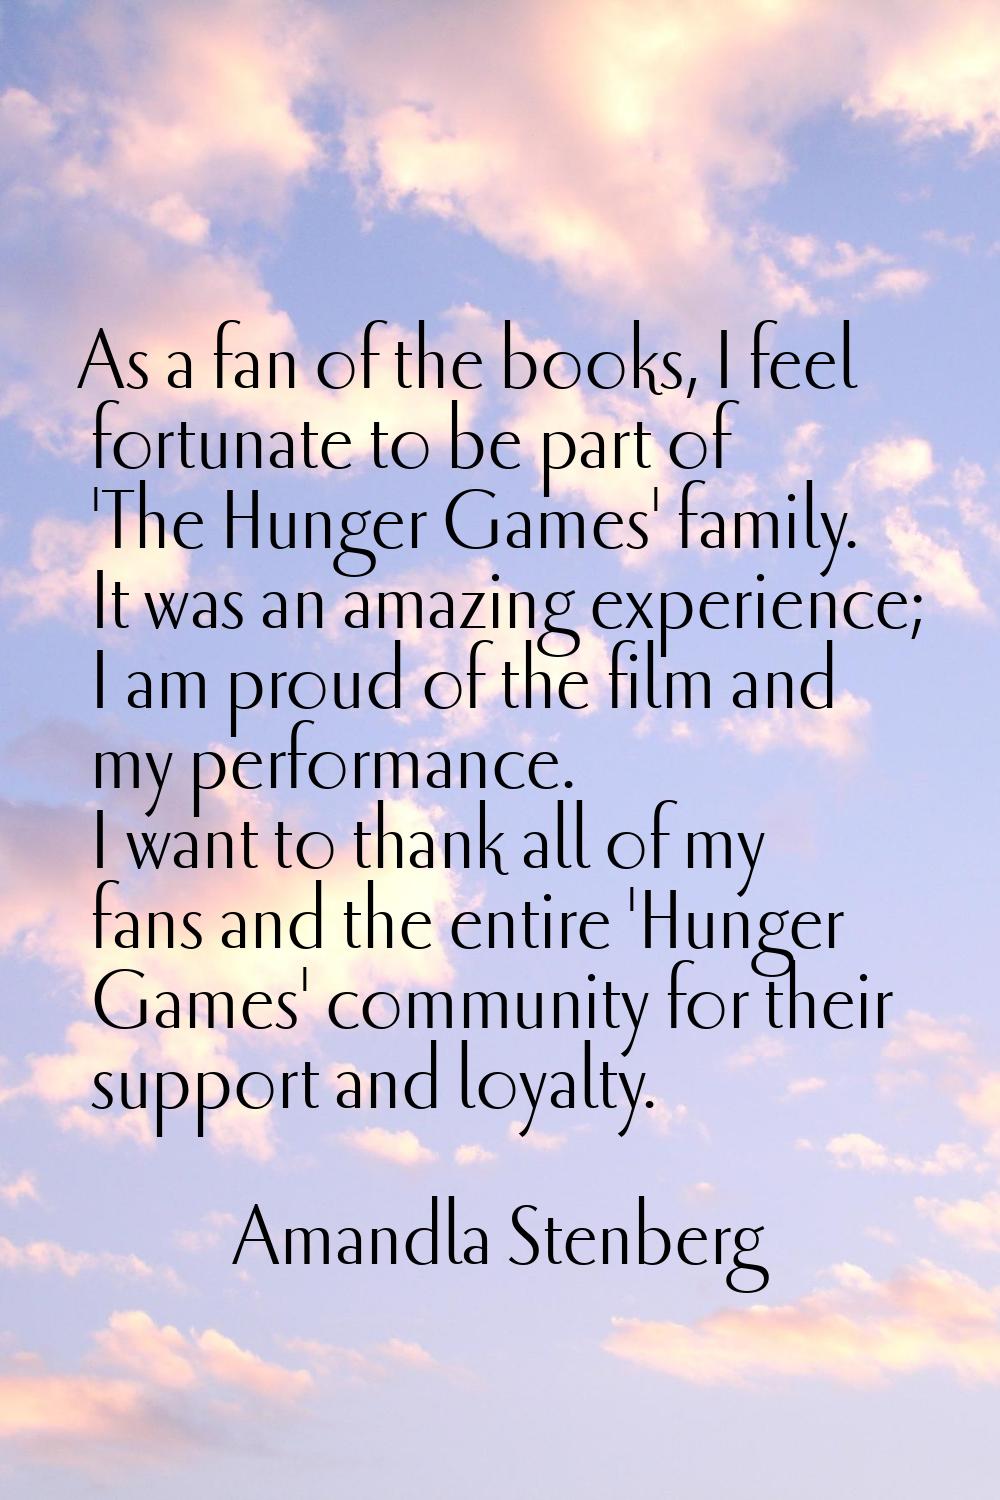 As a fan of the books, I feel fortunate to be part of 'The Hunger Games' family. It was an amazing 